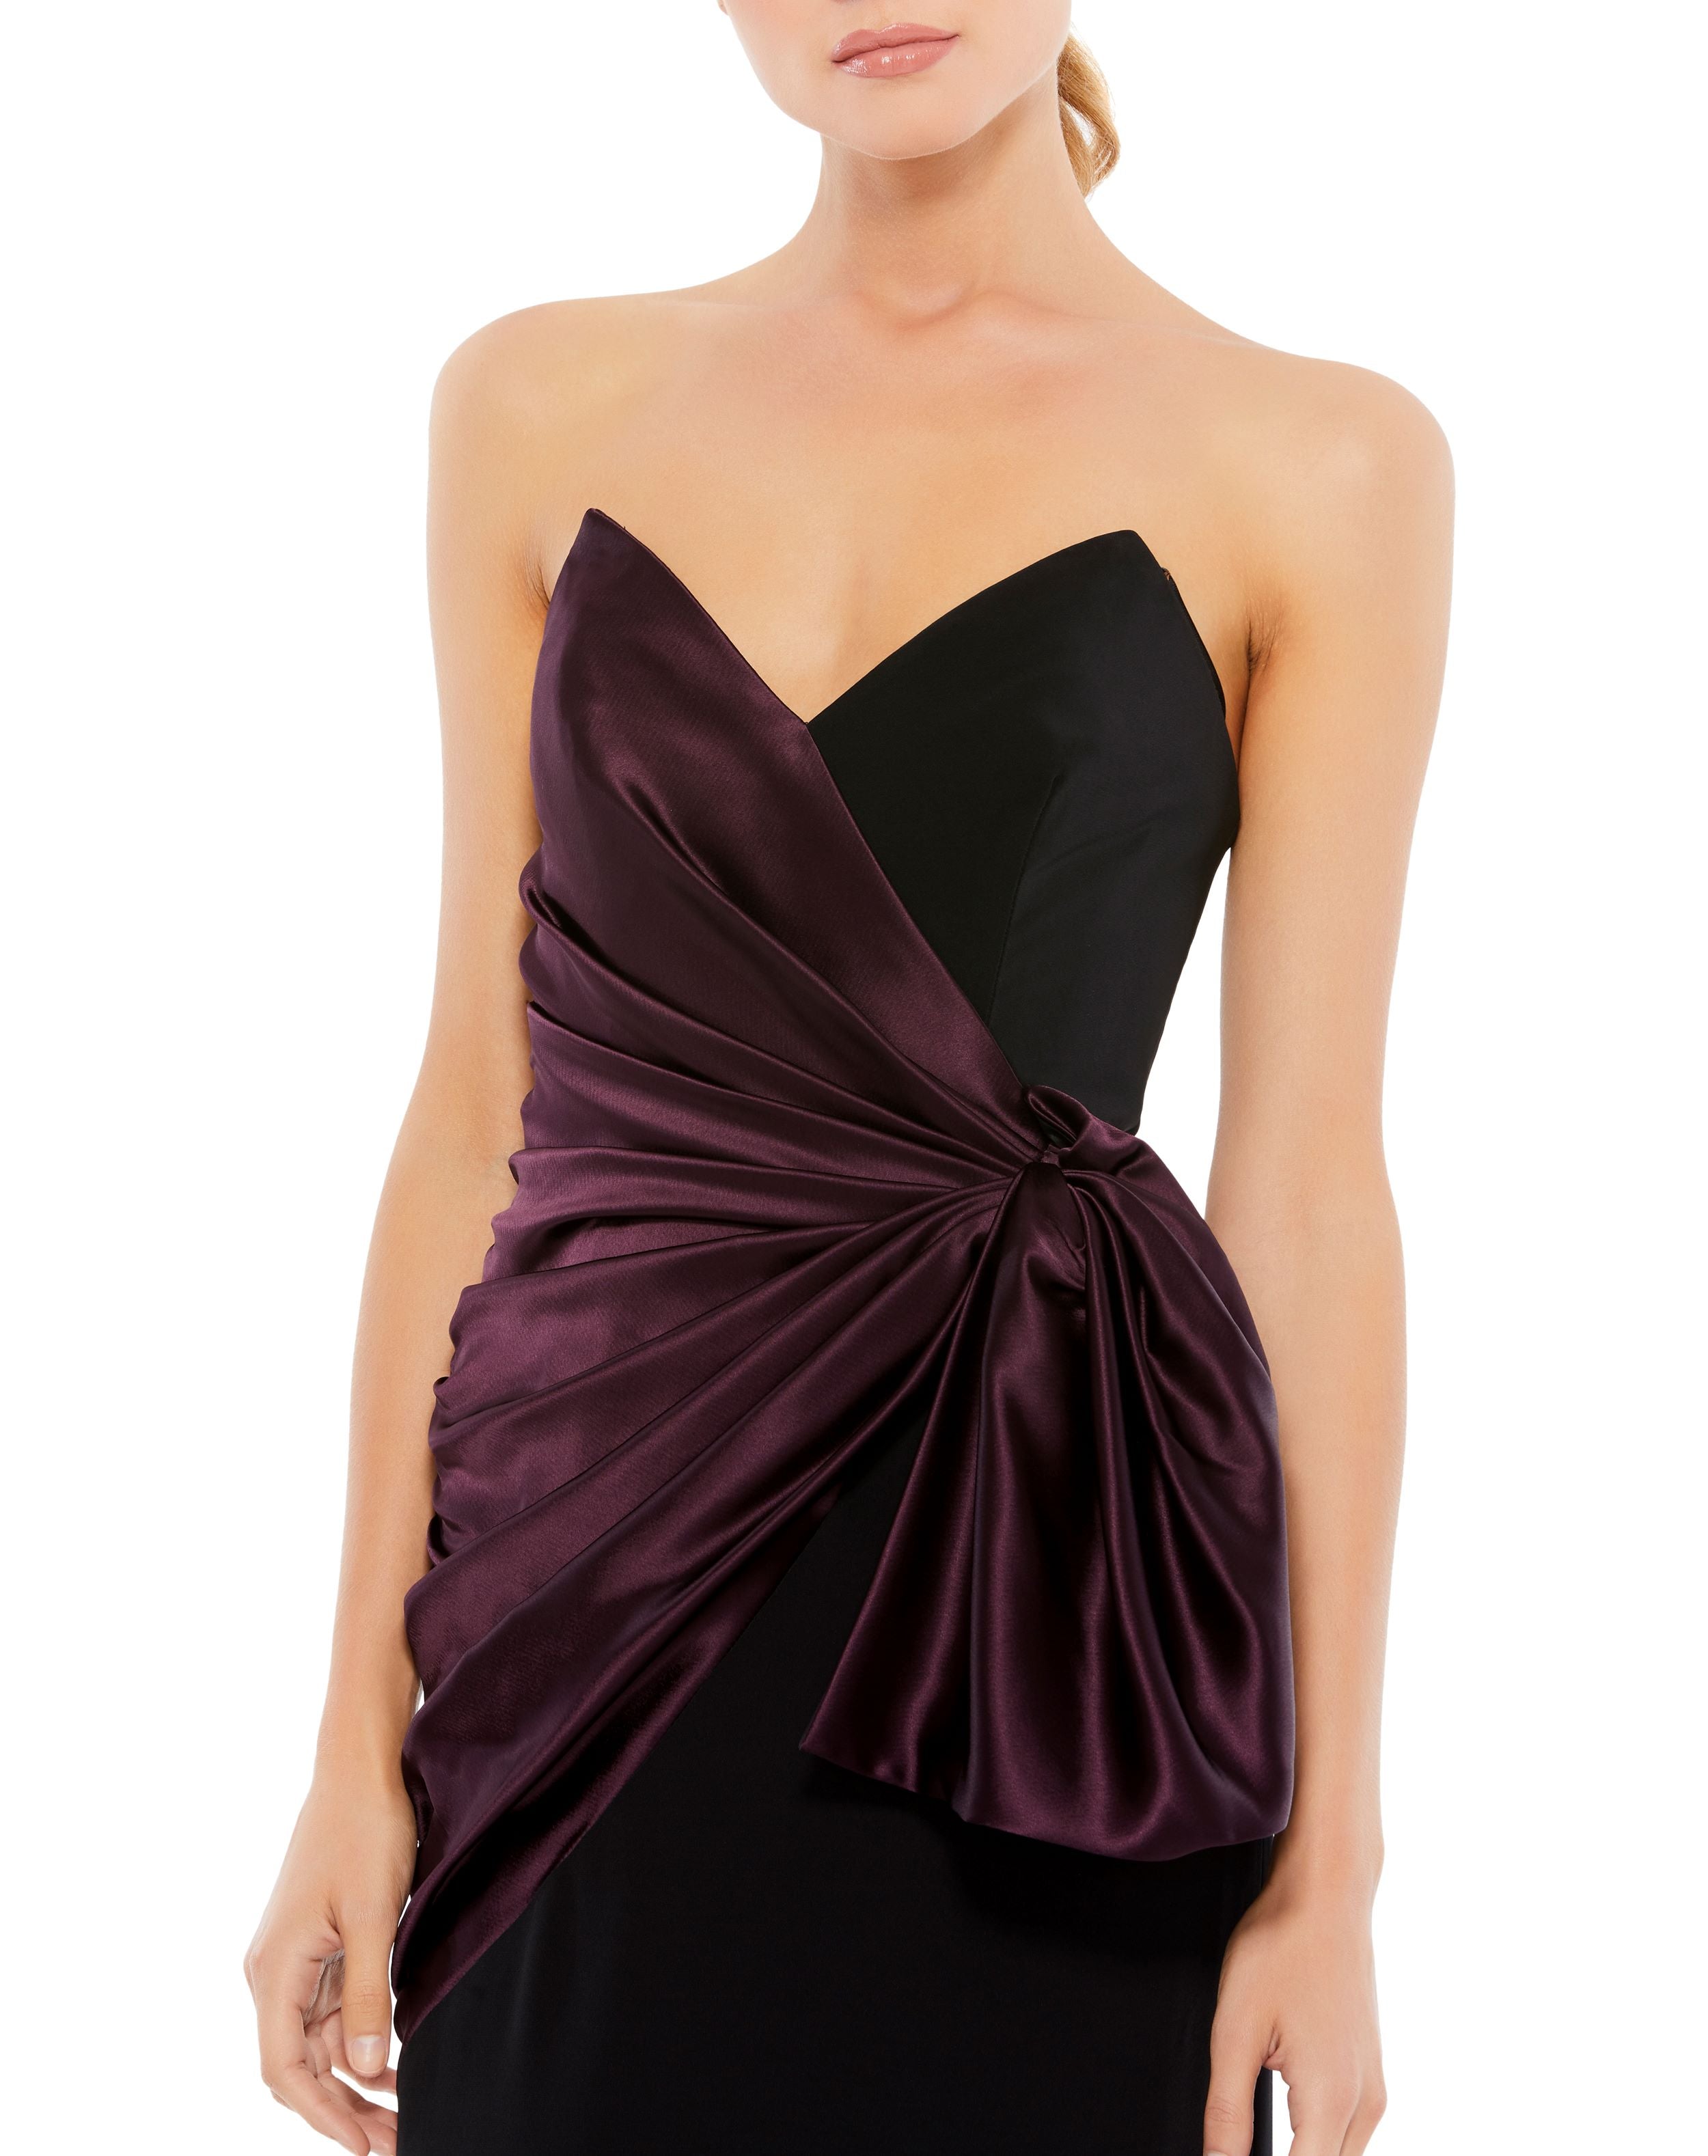 Black crepe and Plum Satin full length gown